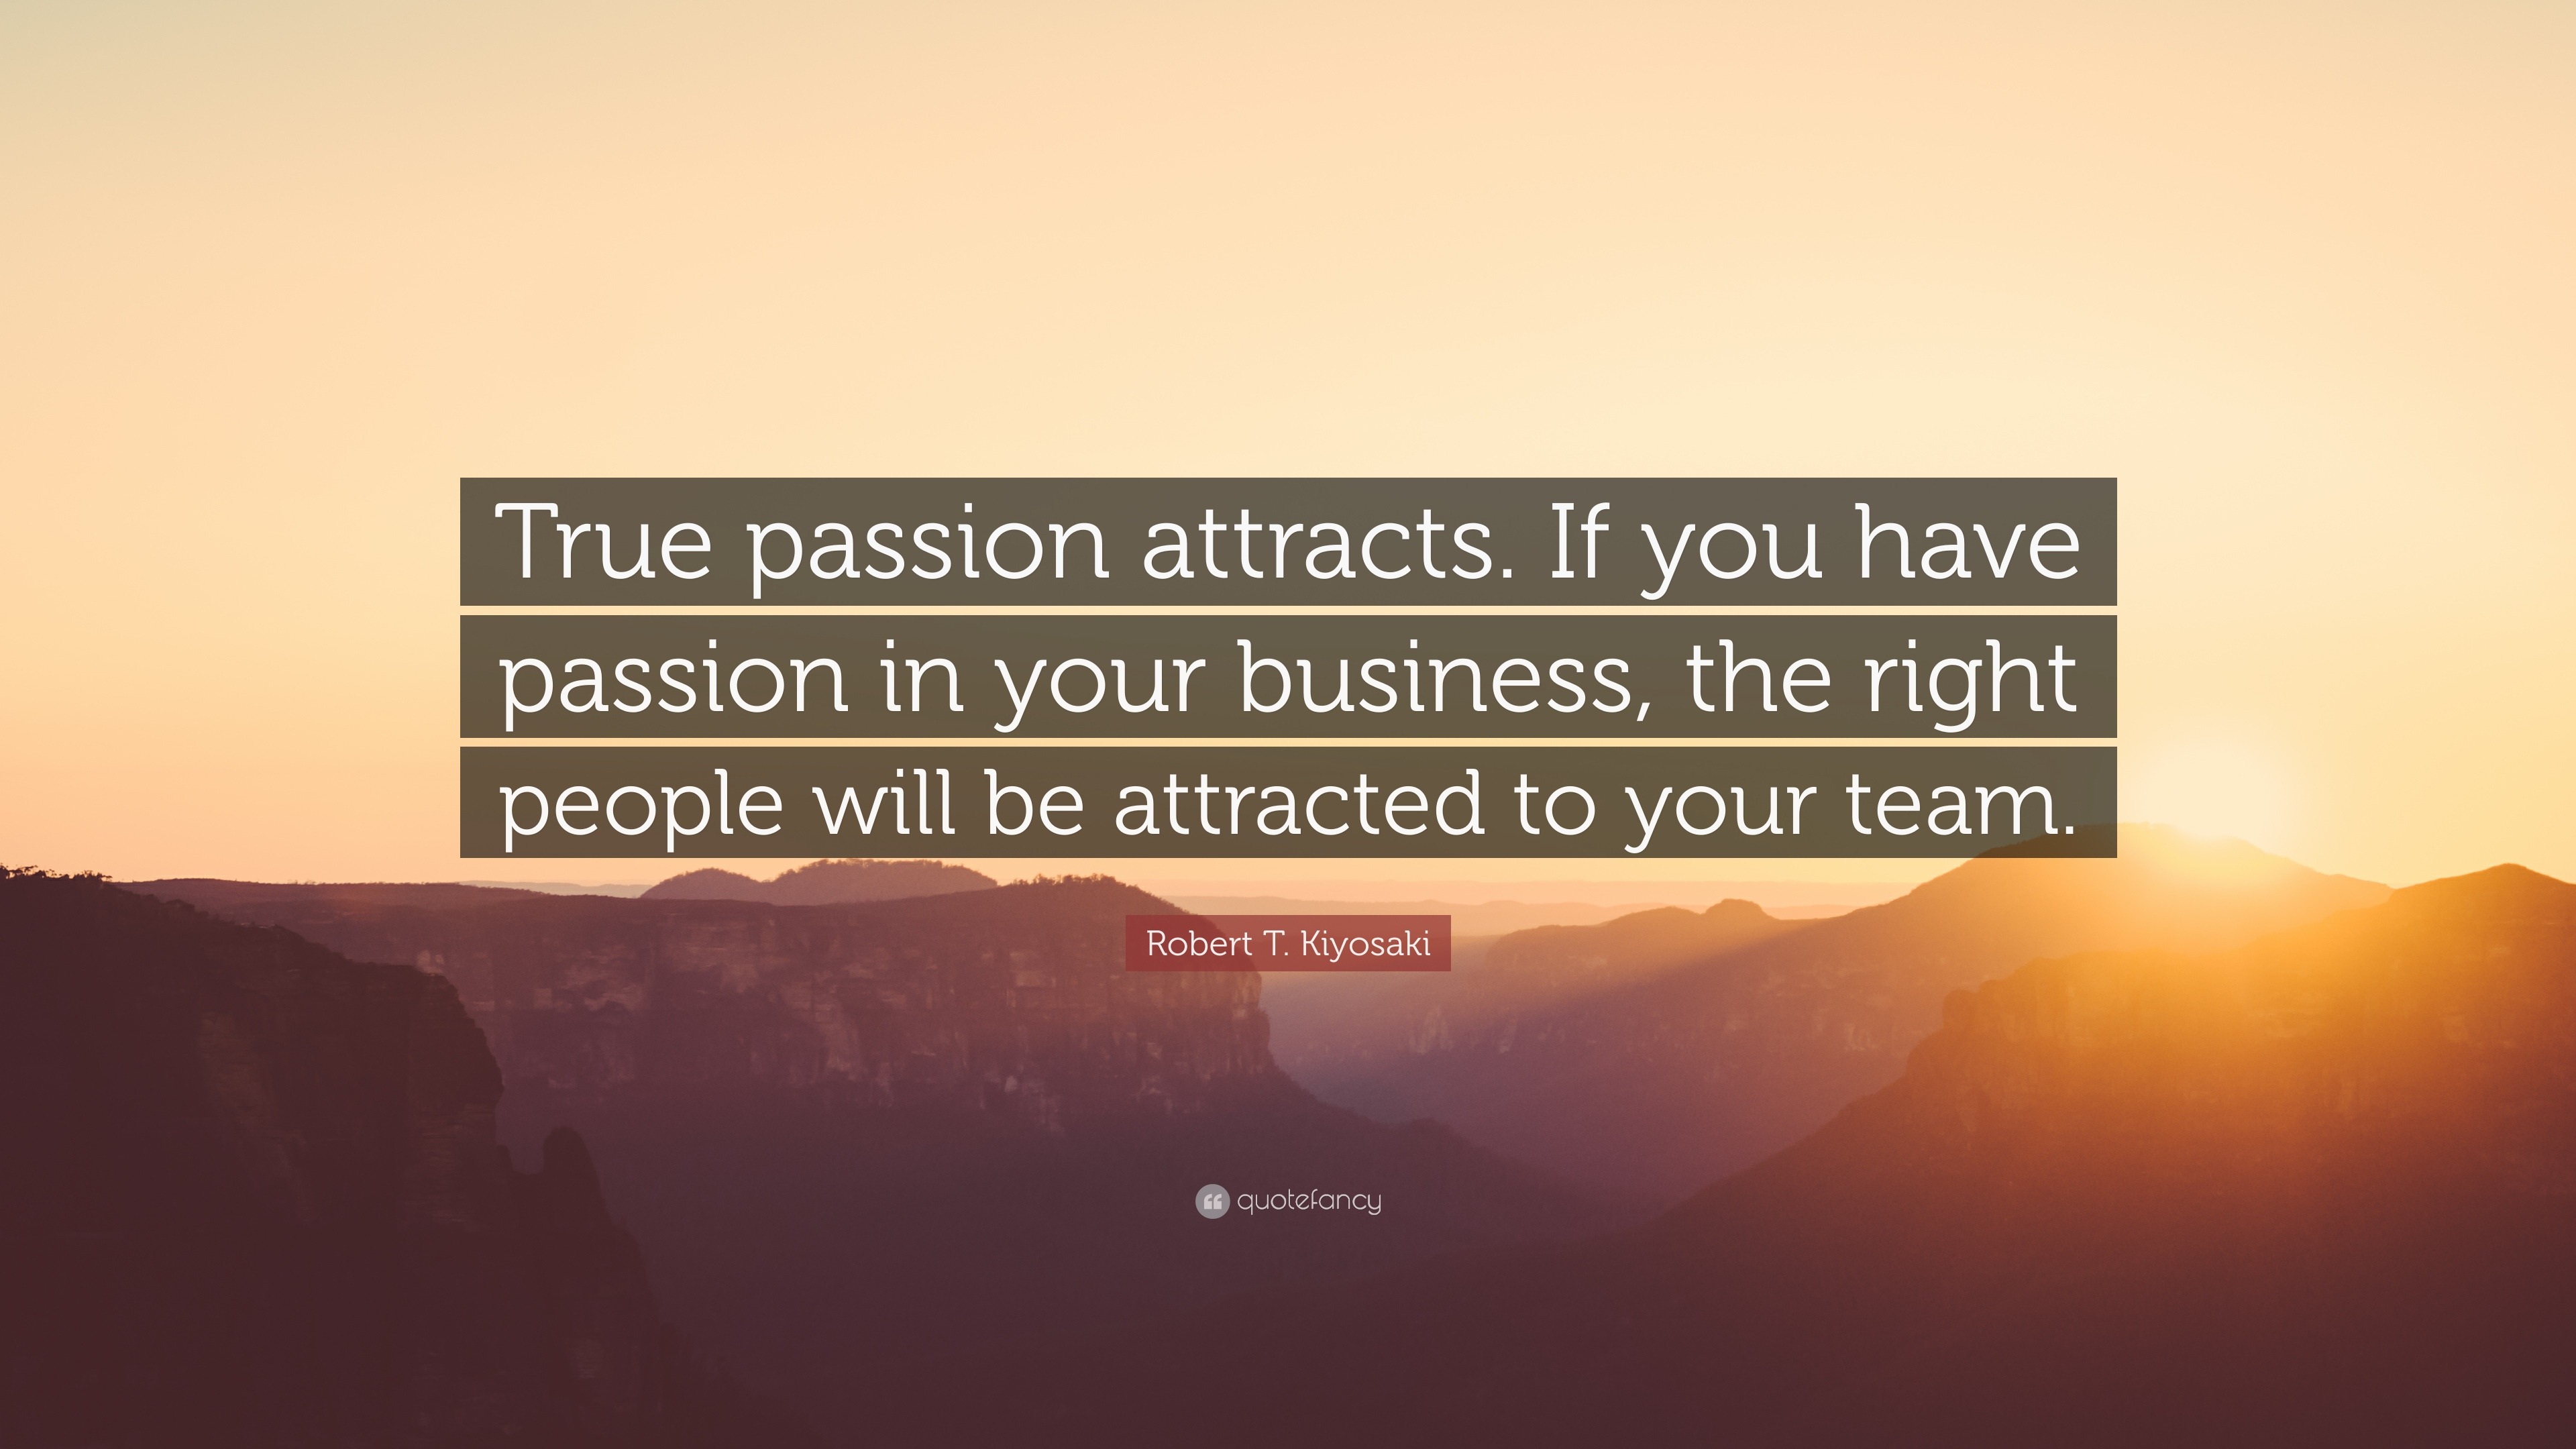 Robert T Kiyosaki Quote “true Passion Attracts If You Have Passion In Your Business The